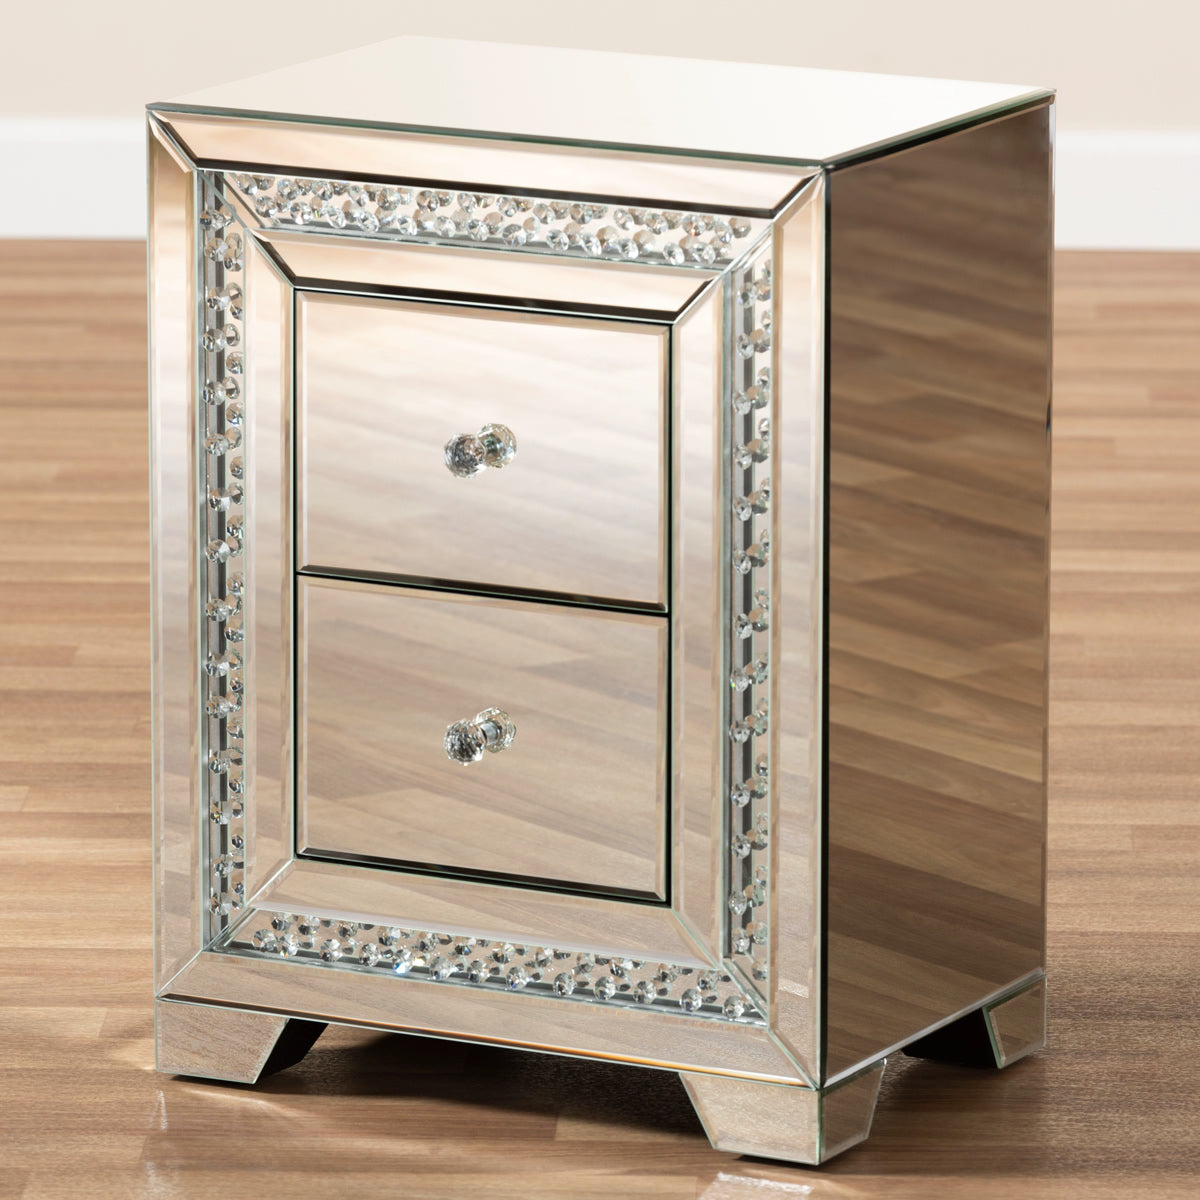 Baxton Studio Mina Modern and Contemporary Hollywood Regency Glamour Style Mirrored Three Drawer Nightstand Bedside Table Baxton Studio-nightstands-Minimal And Modern - 6